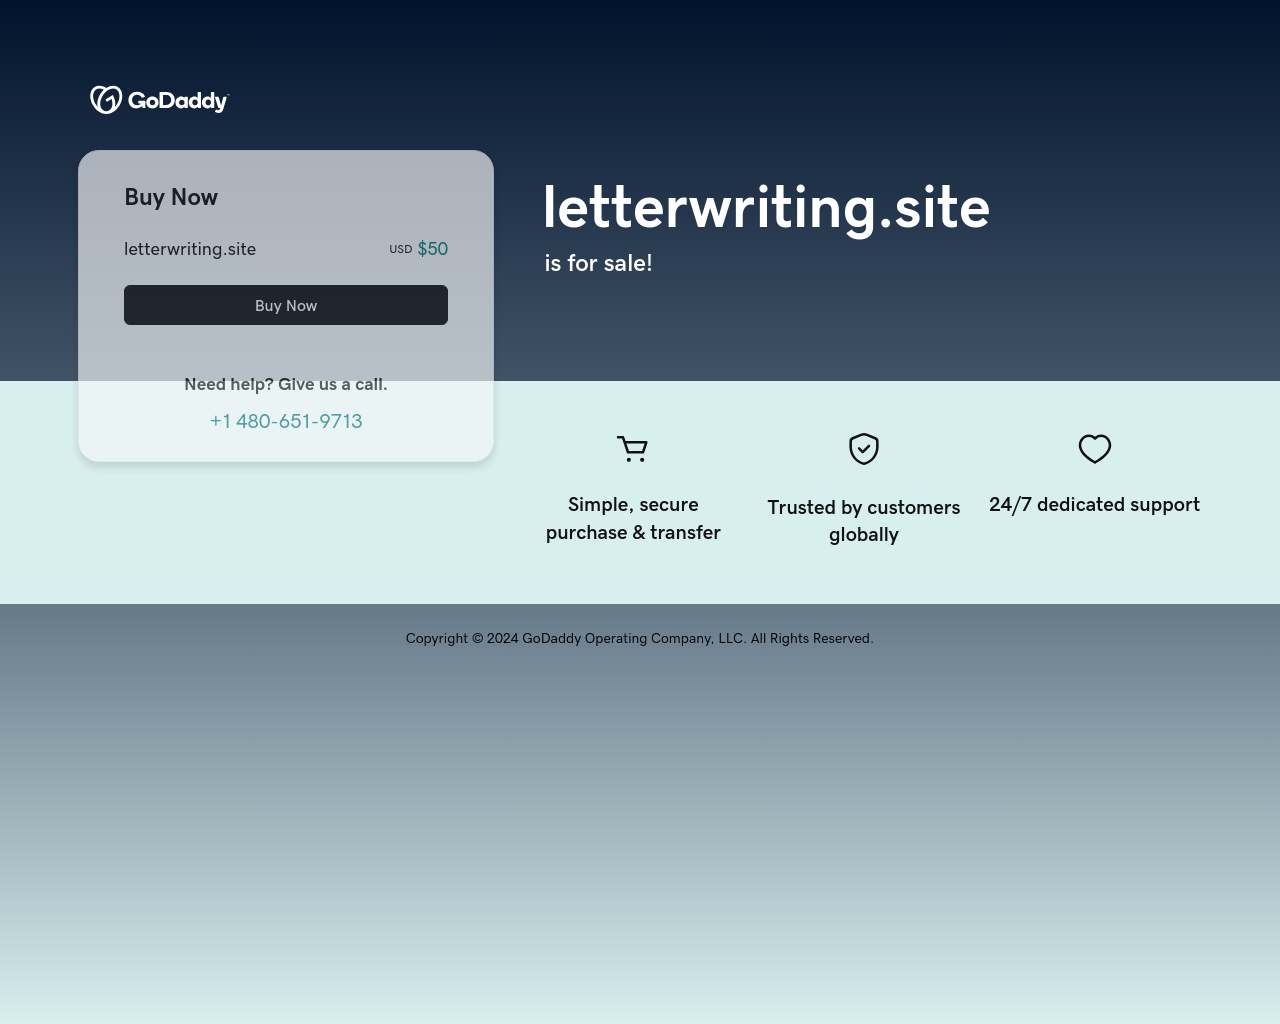 letterwriting.site